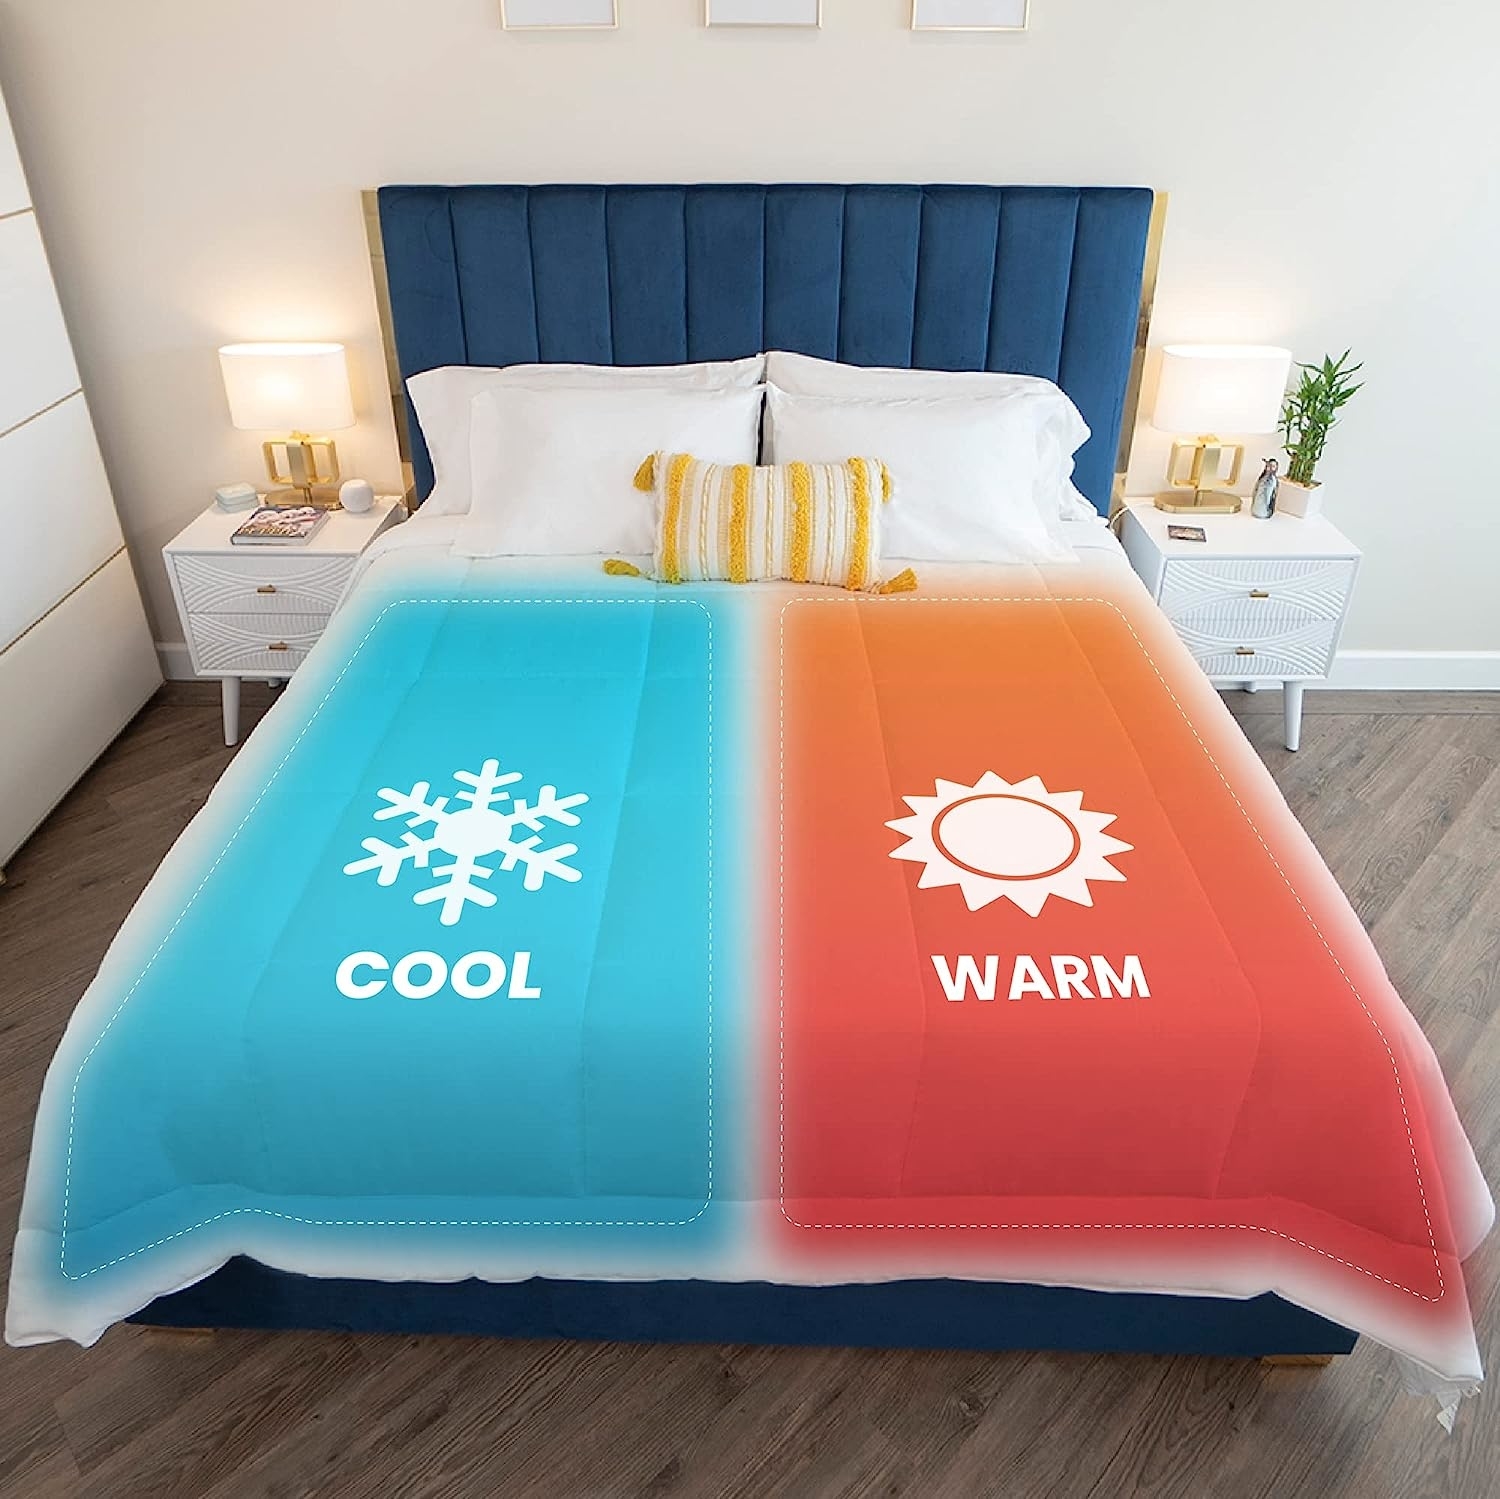 Dual-zone comforter with one side labeled &#x27;COOL&#x27; and the other &#x27;WARM&#x27; on a bed, ideal for different temperature preferences